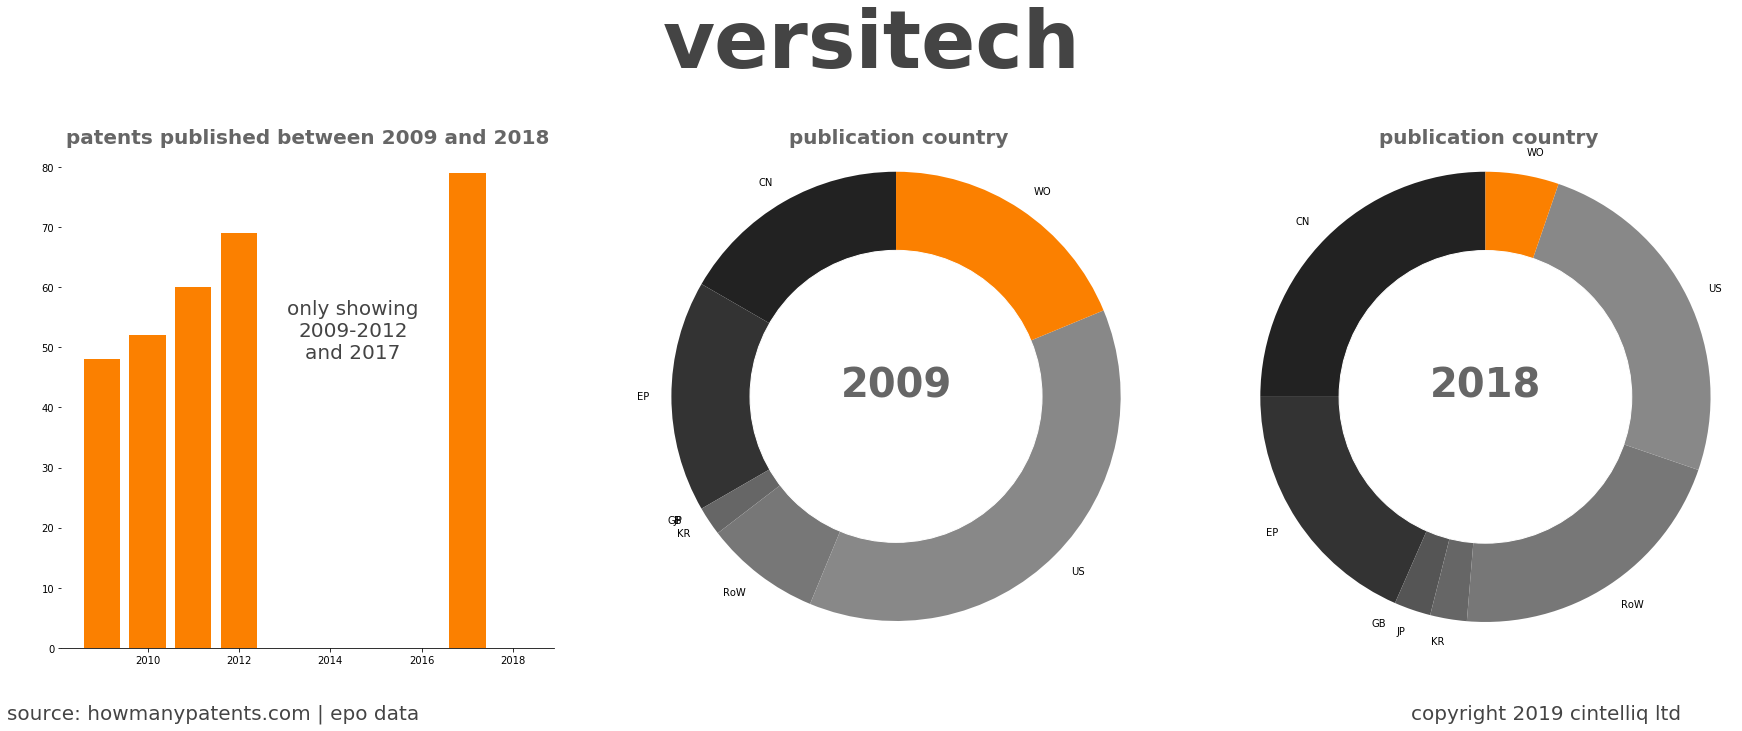 summary of patents for Versitech